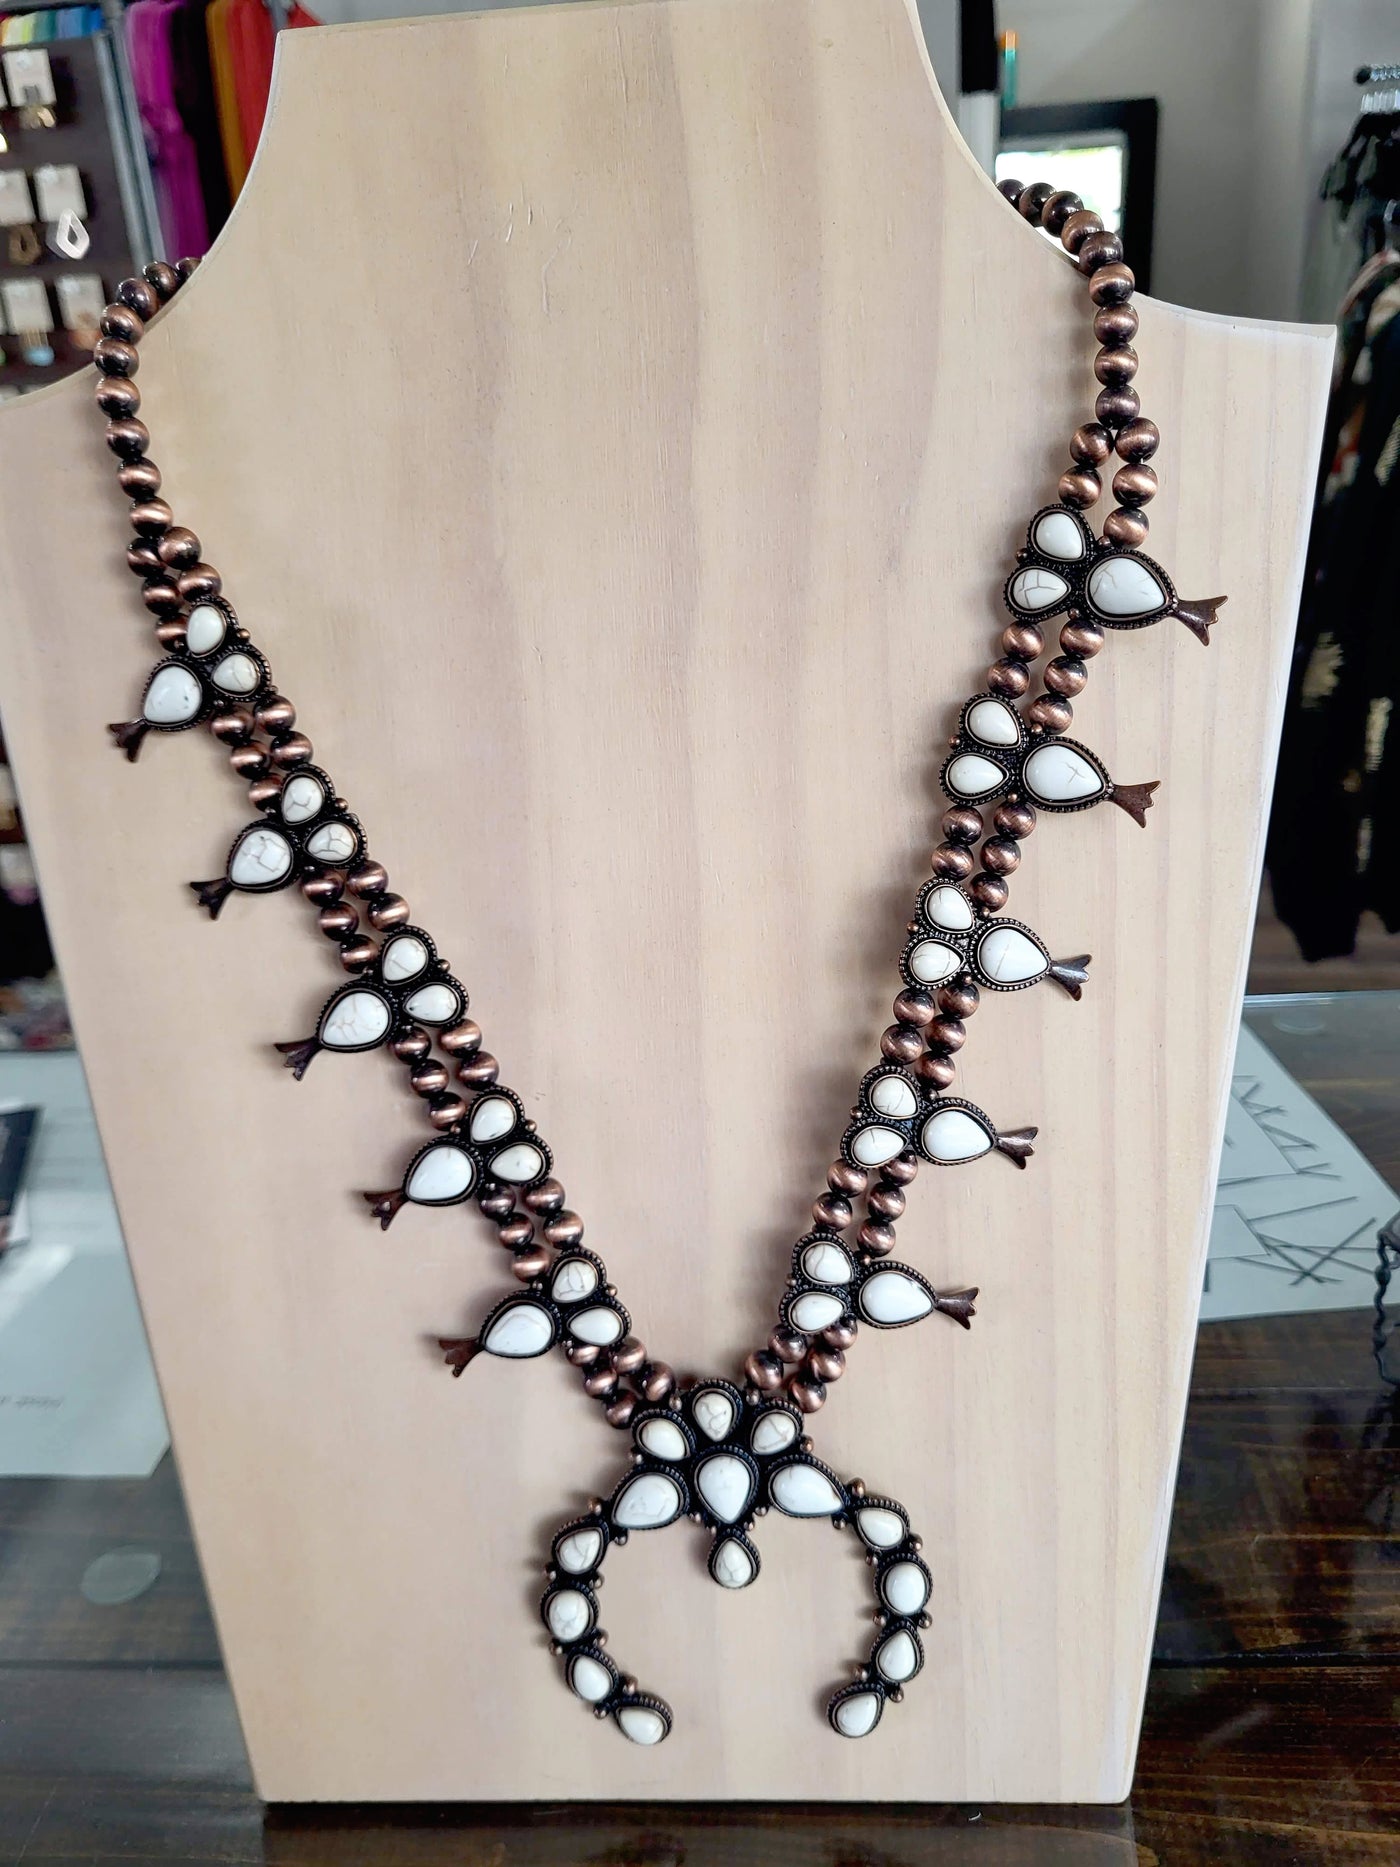 Necklace 72843 01.19